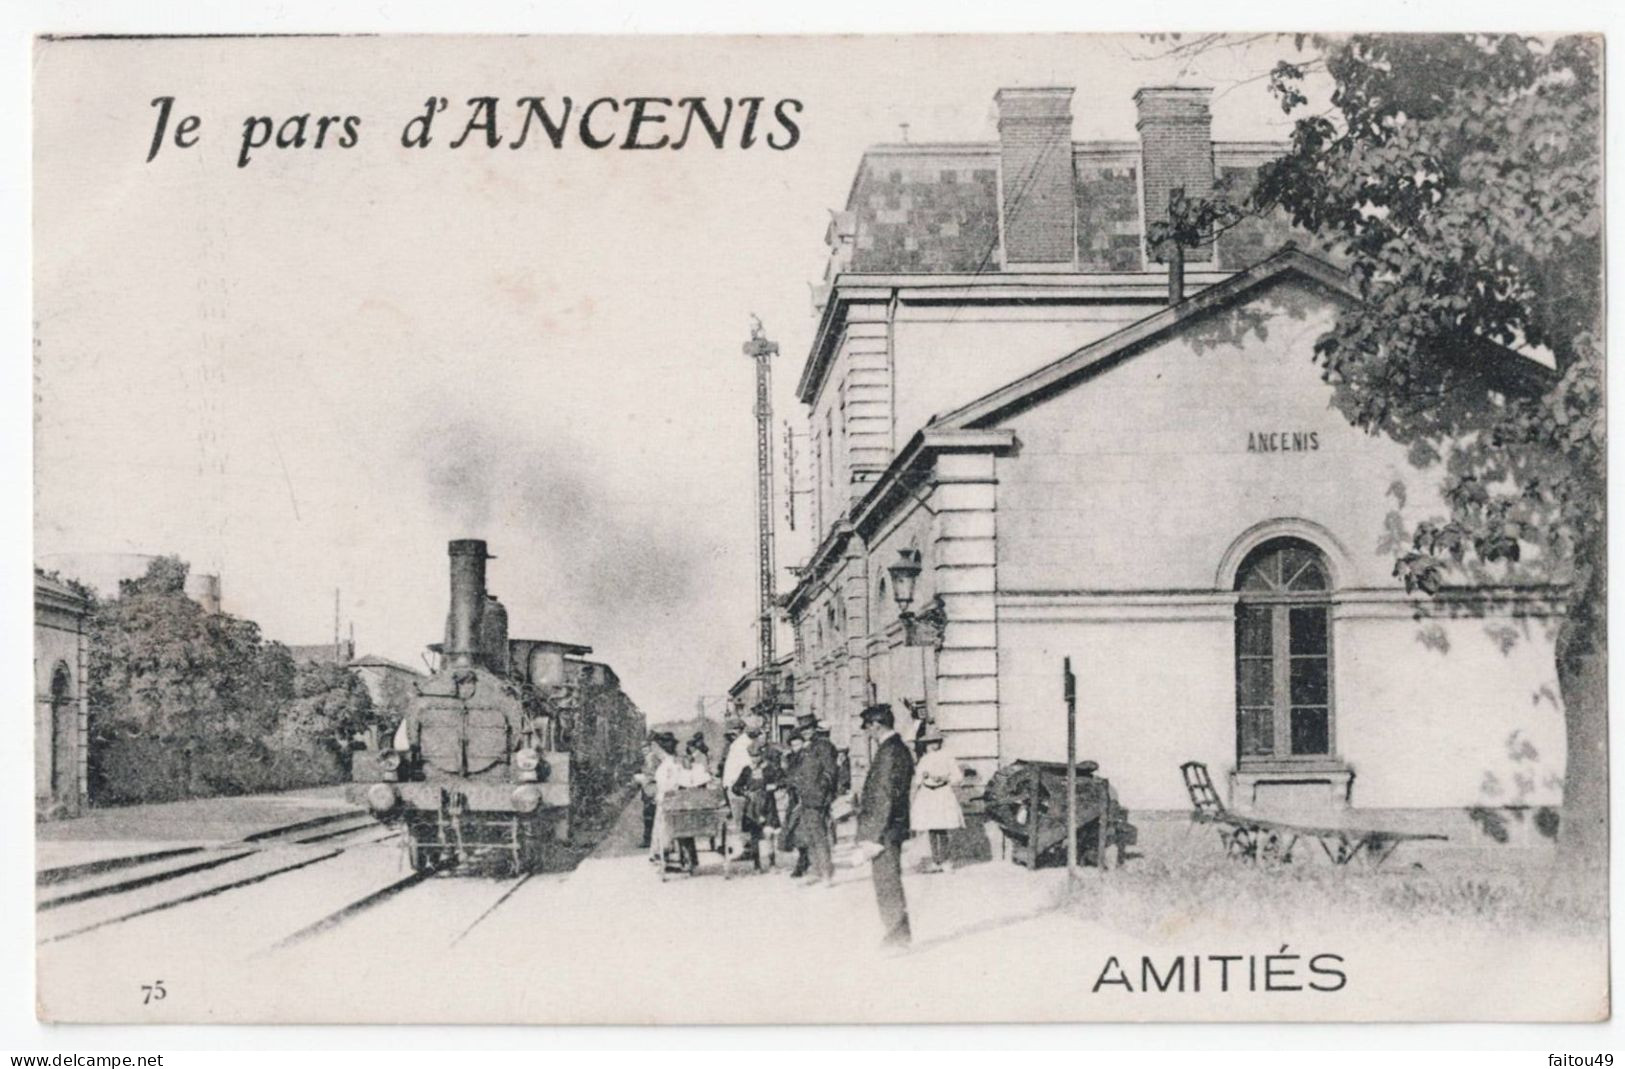 44 - Je Pars D ANCENIS - Amities   59 - Ancenis